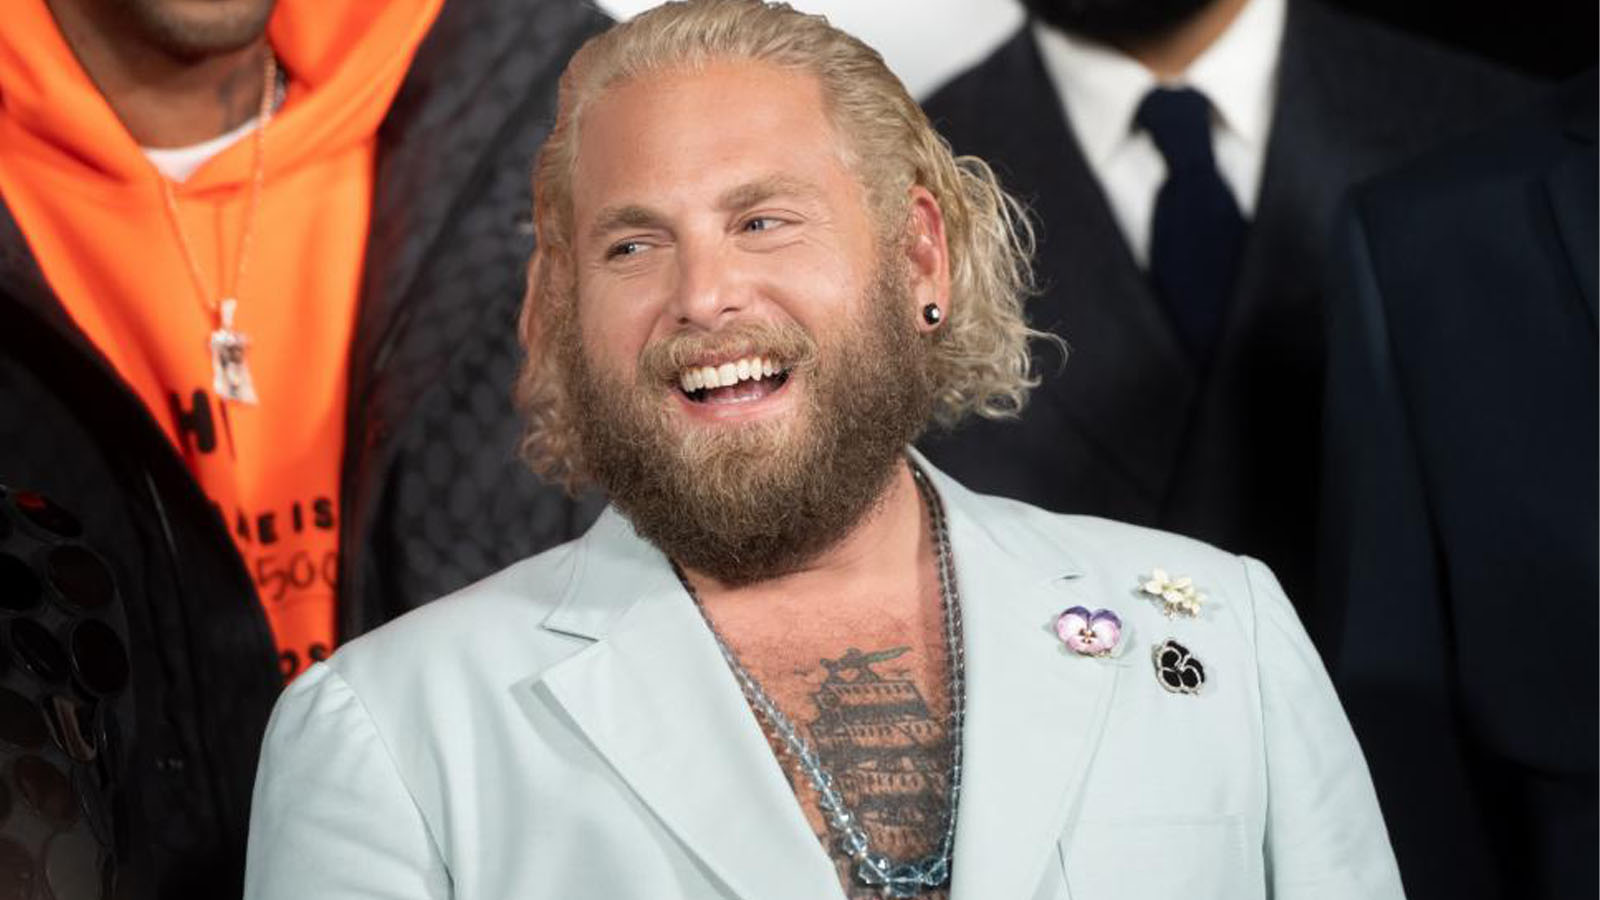 Jonah Hill on board to play John Daly in biopic, according to report ...